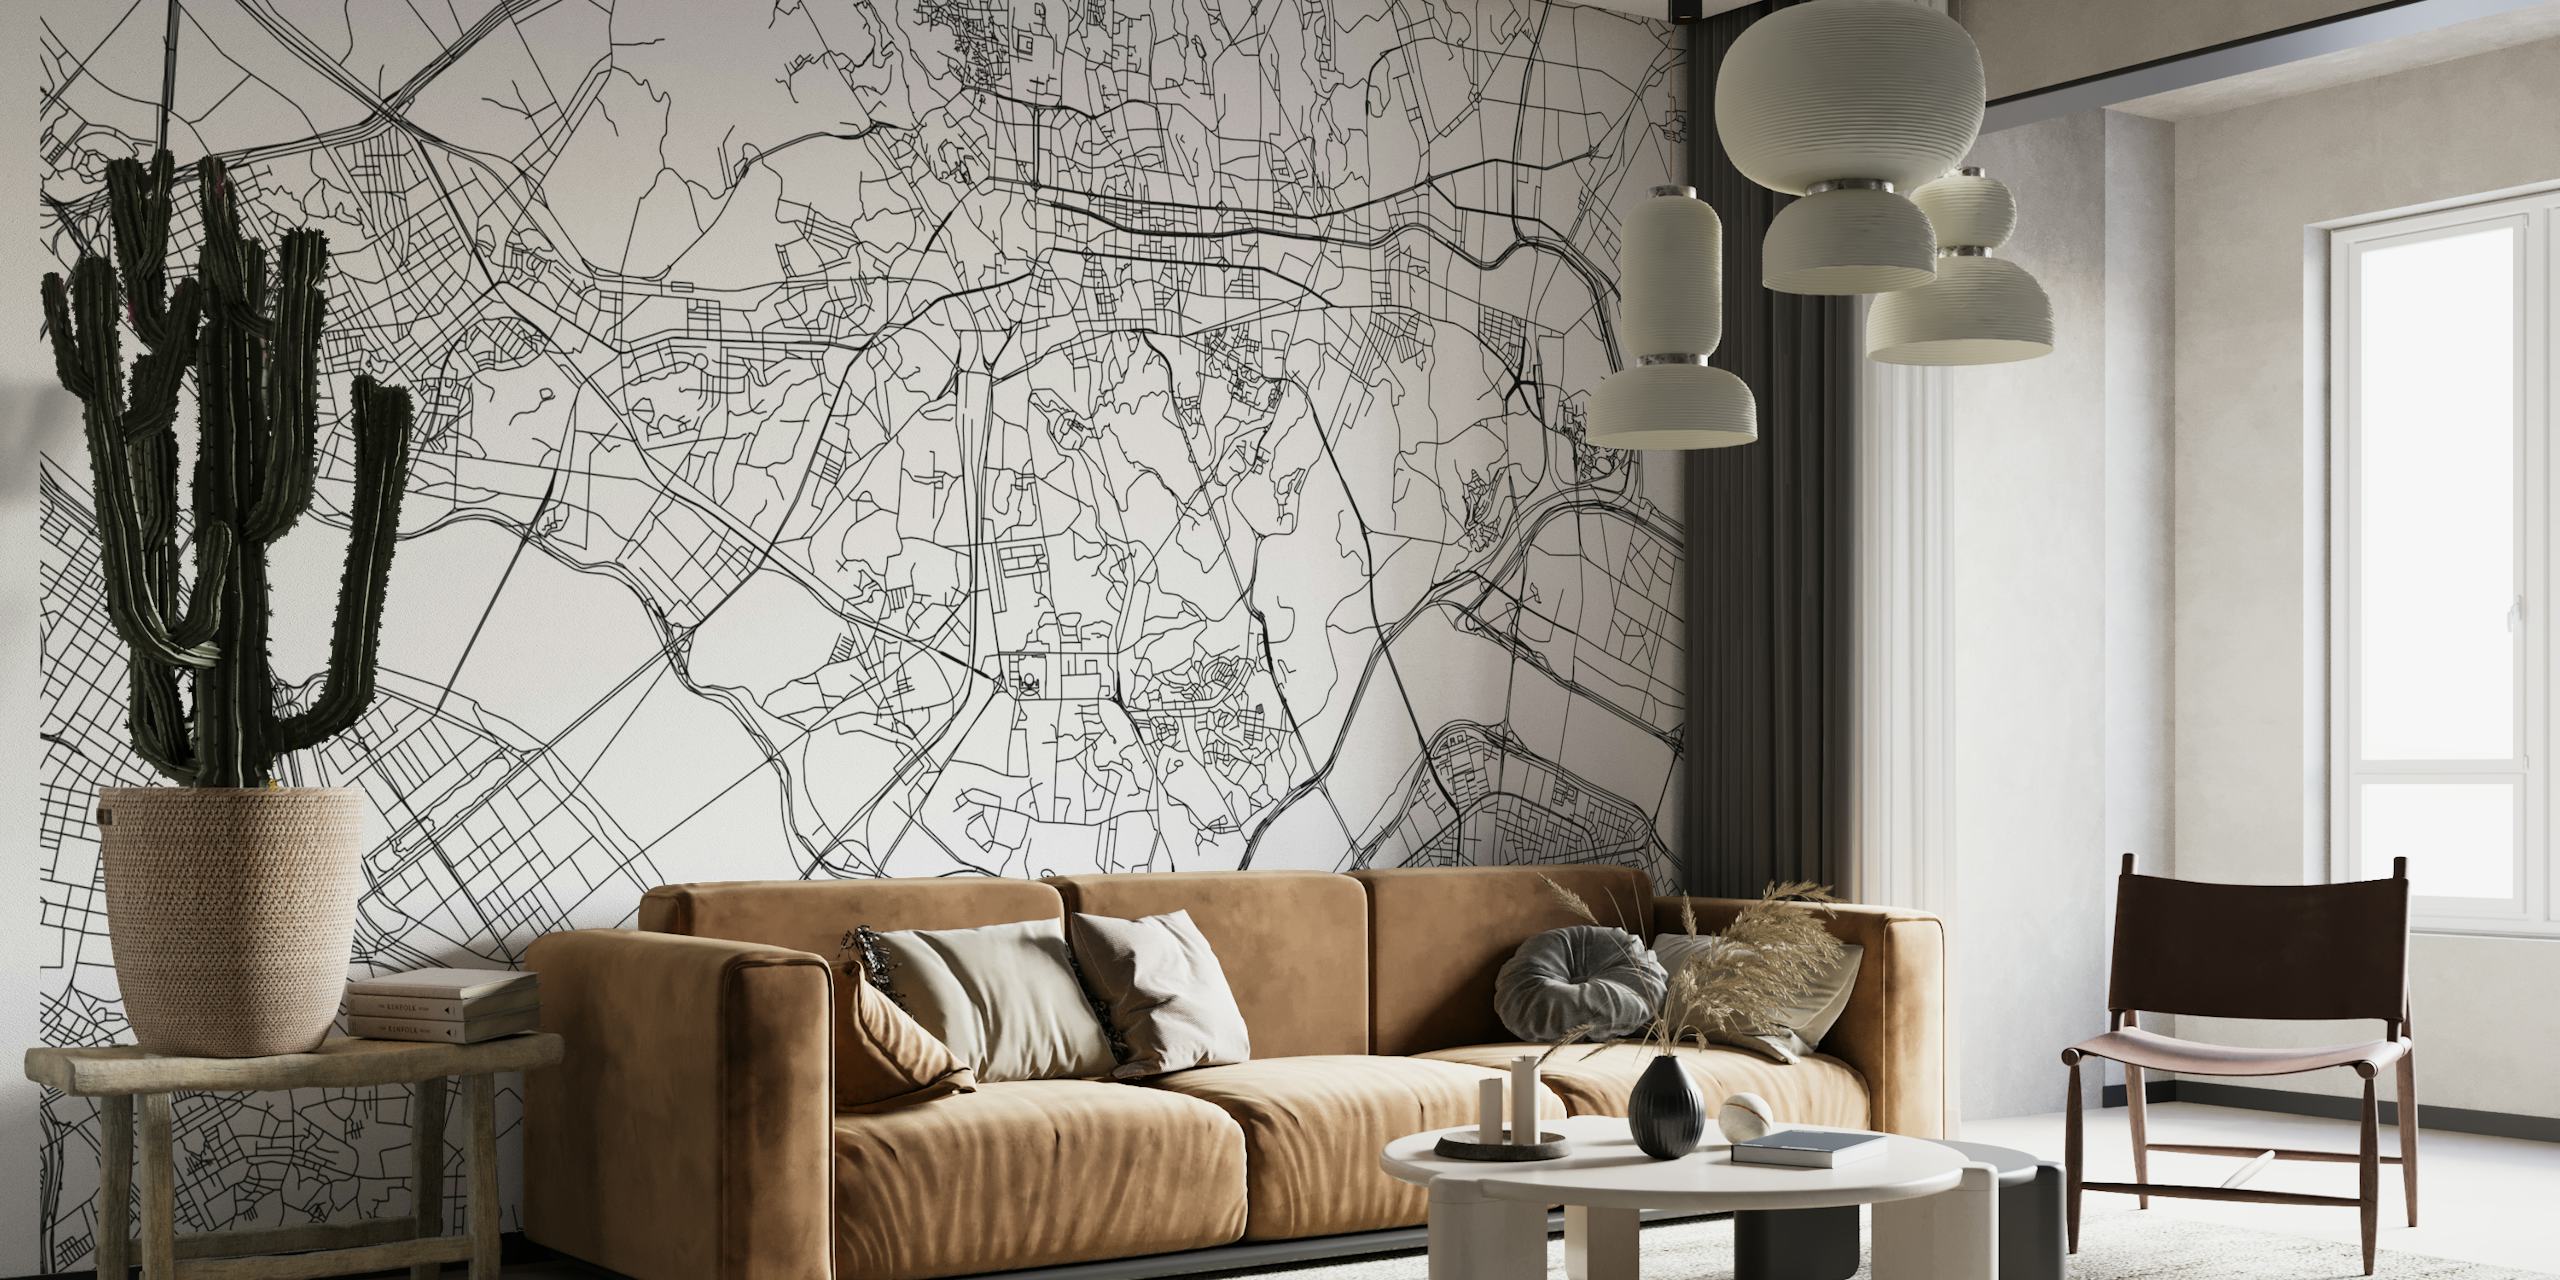 Stylized black and white map of Seoul for wall mural